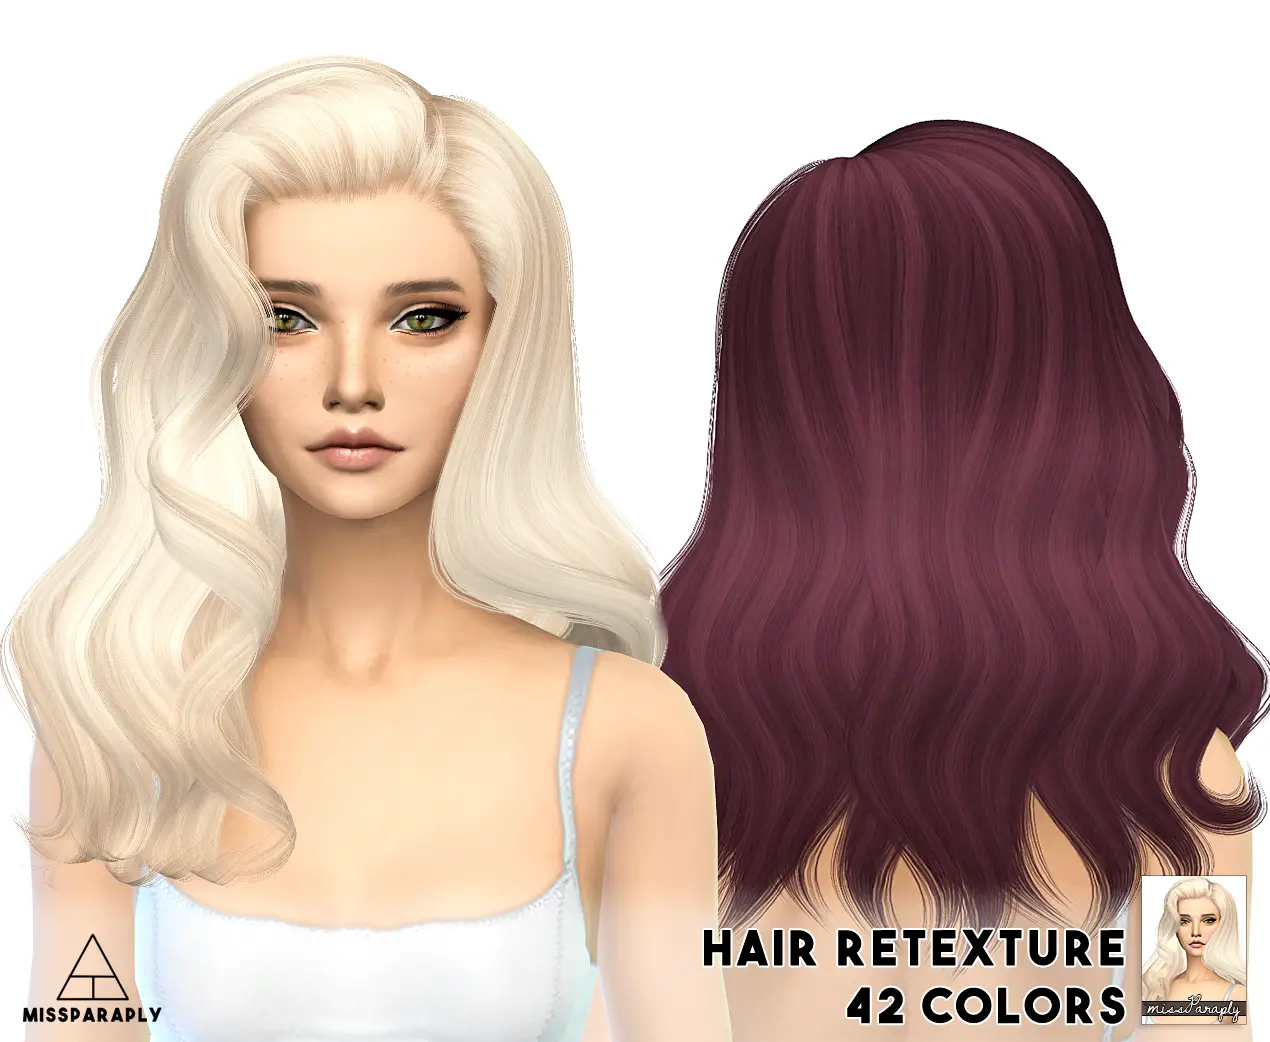 Sims 4 Hairs Miss Paraply Alesso`s Omen Hairstyle Retextured